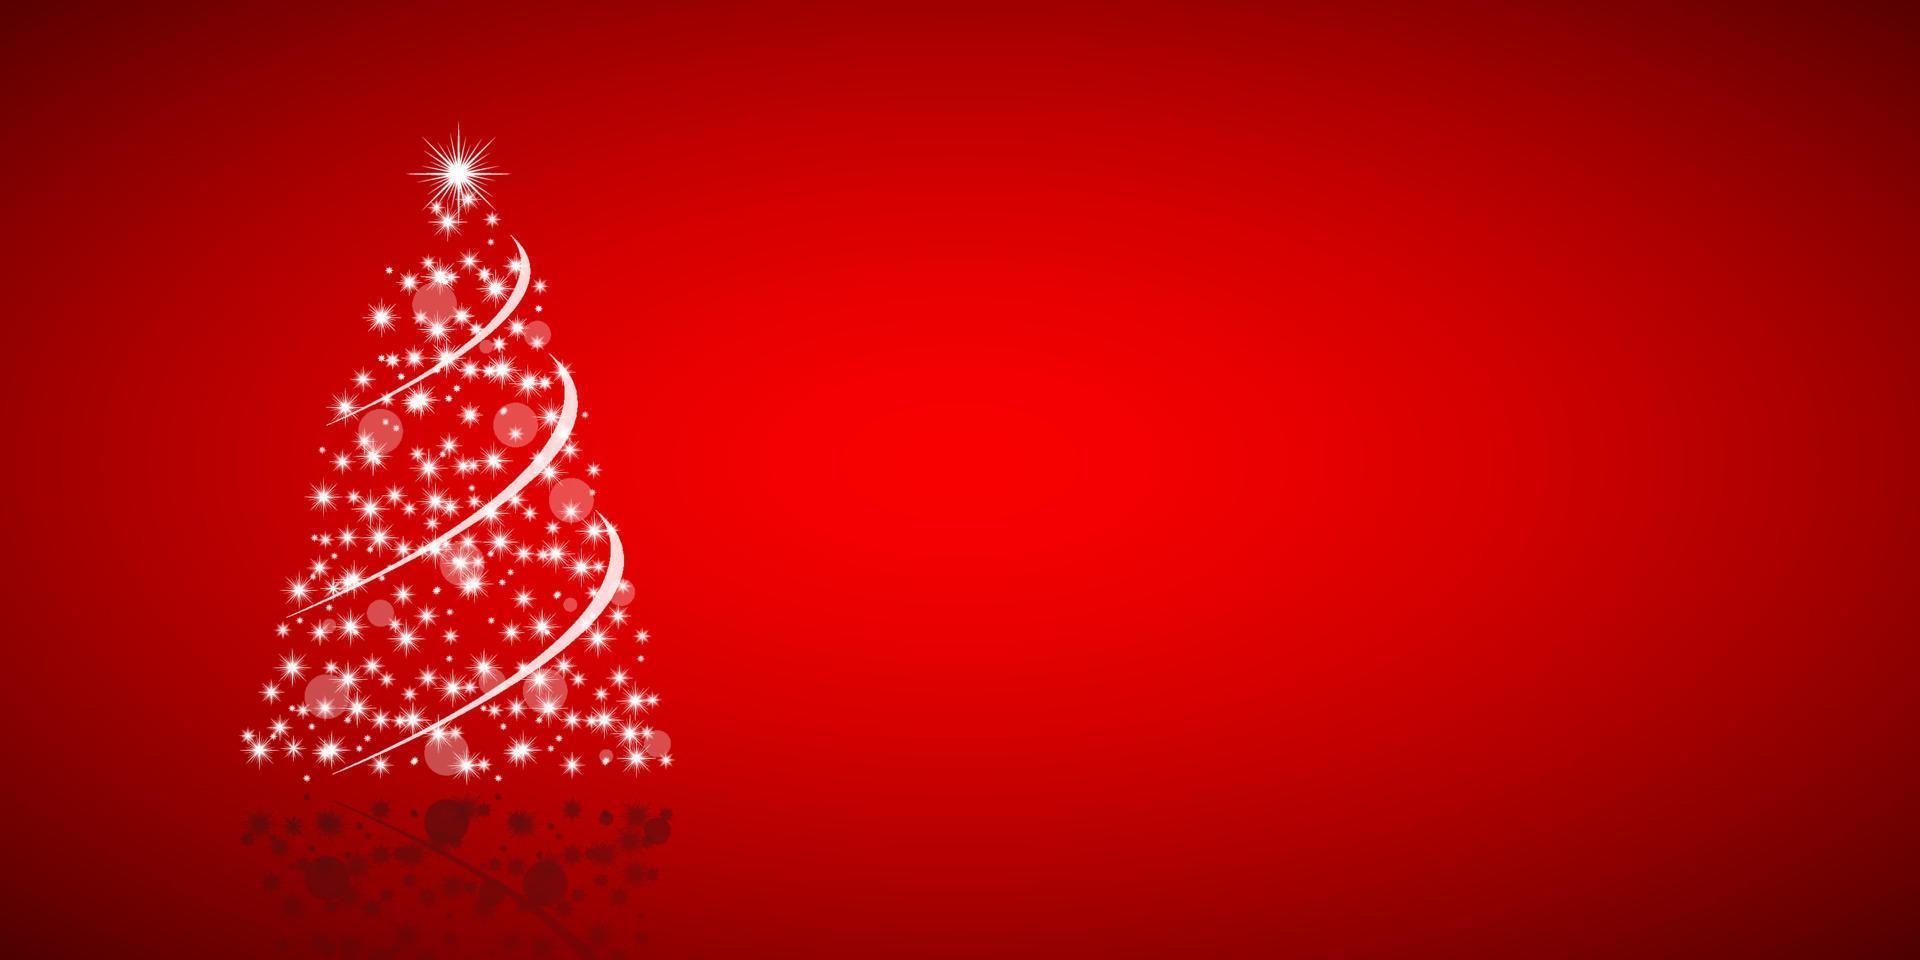 Christmas tree from stars on red background, holiday greeting card, merry christmas card vector